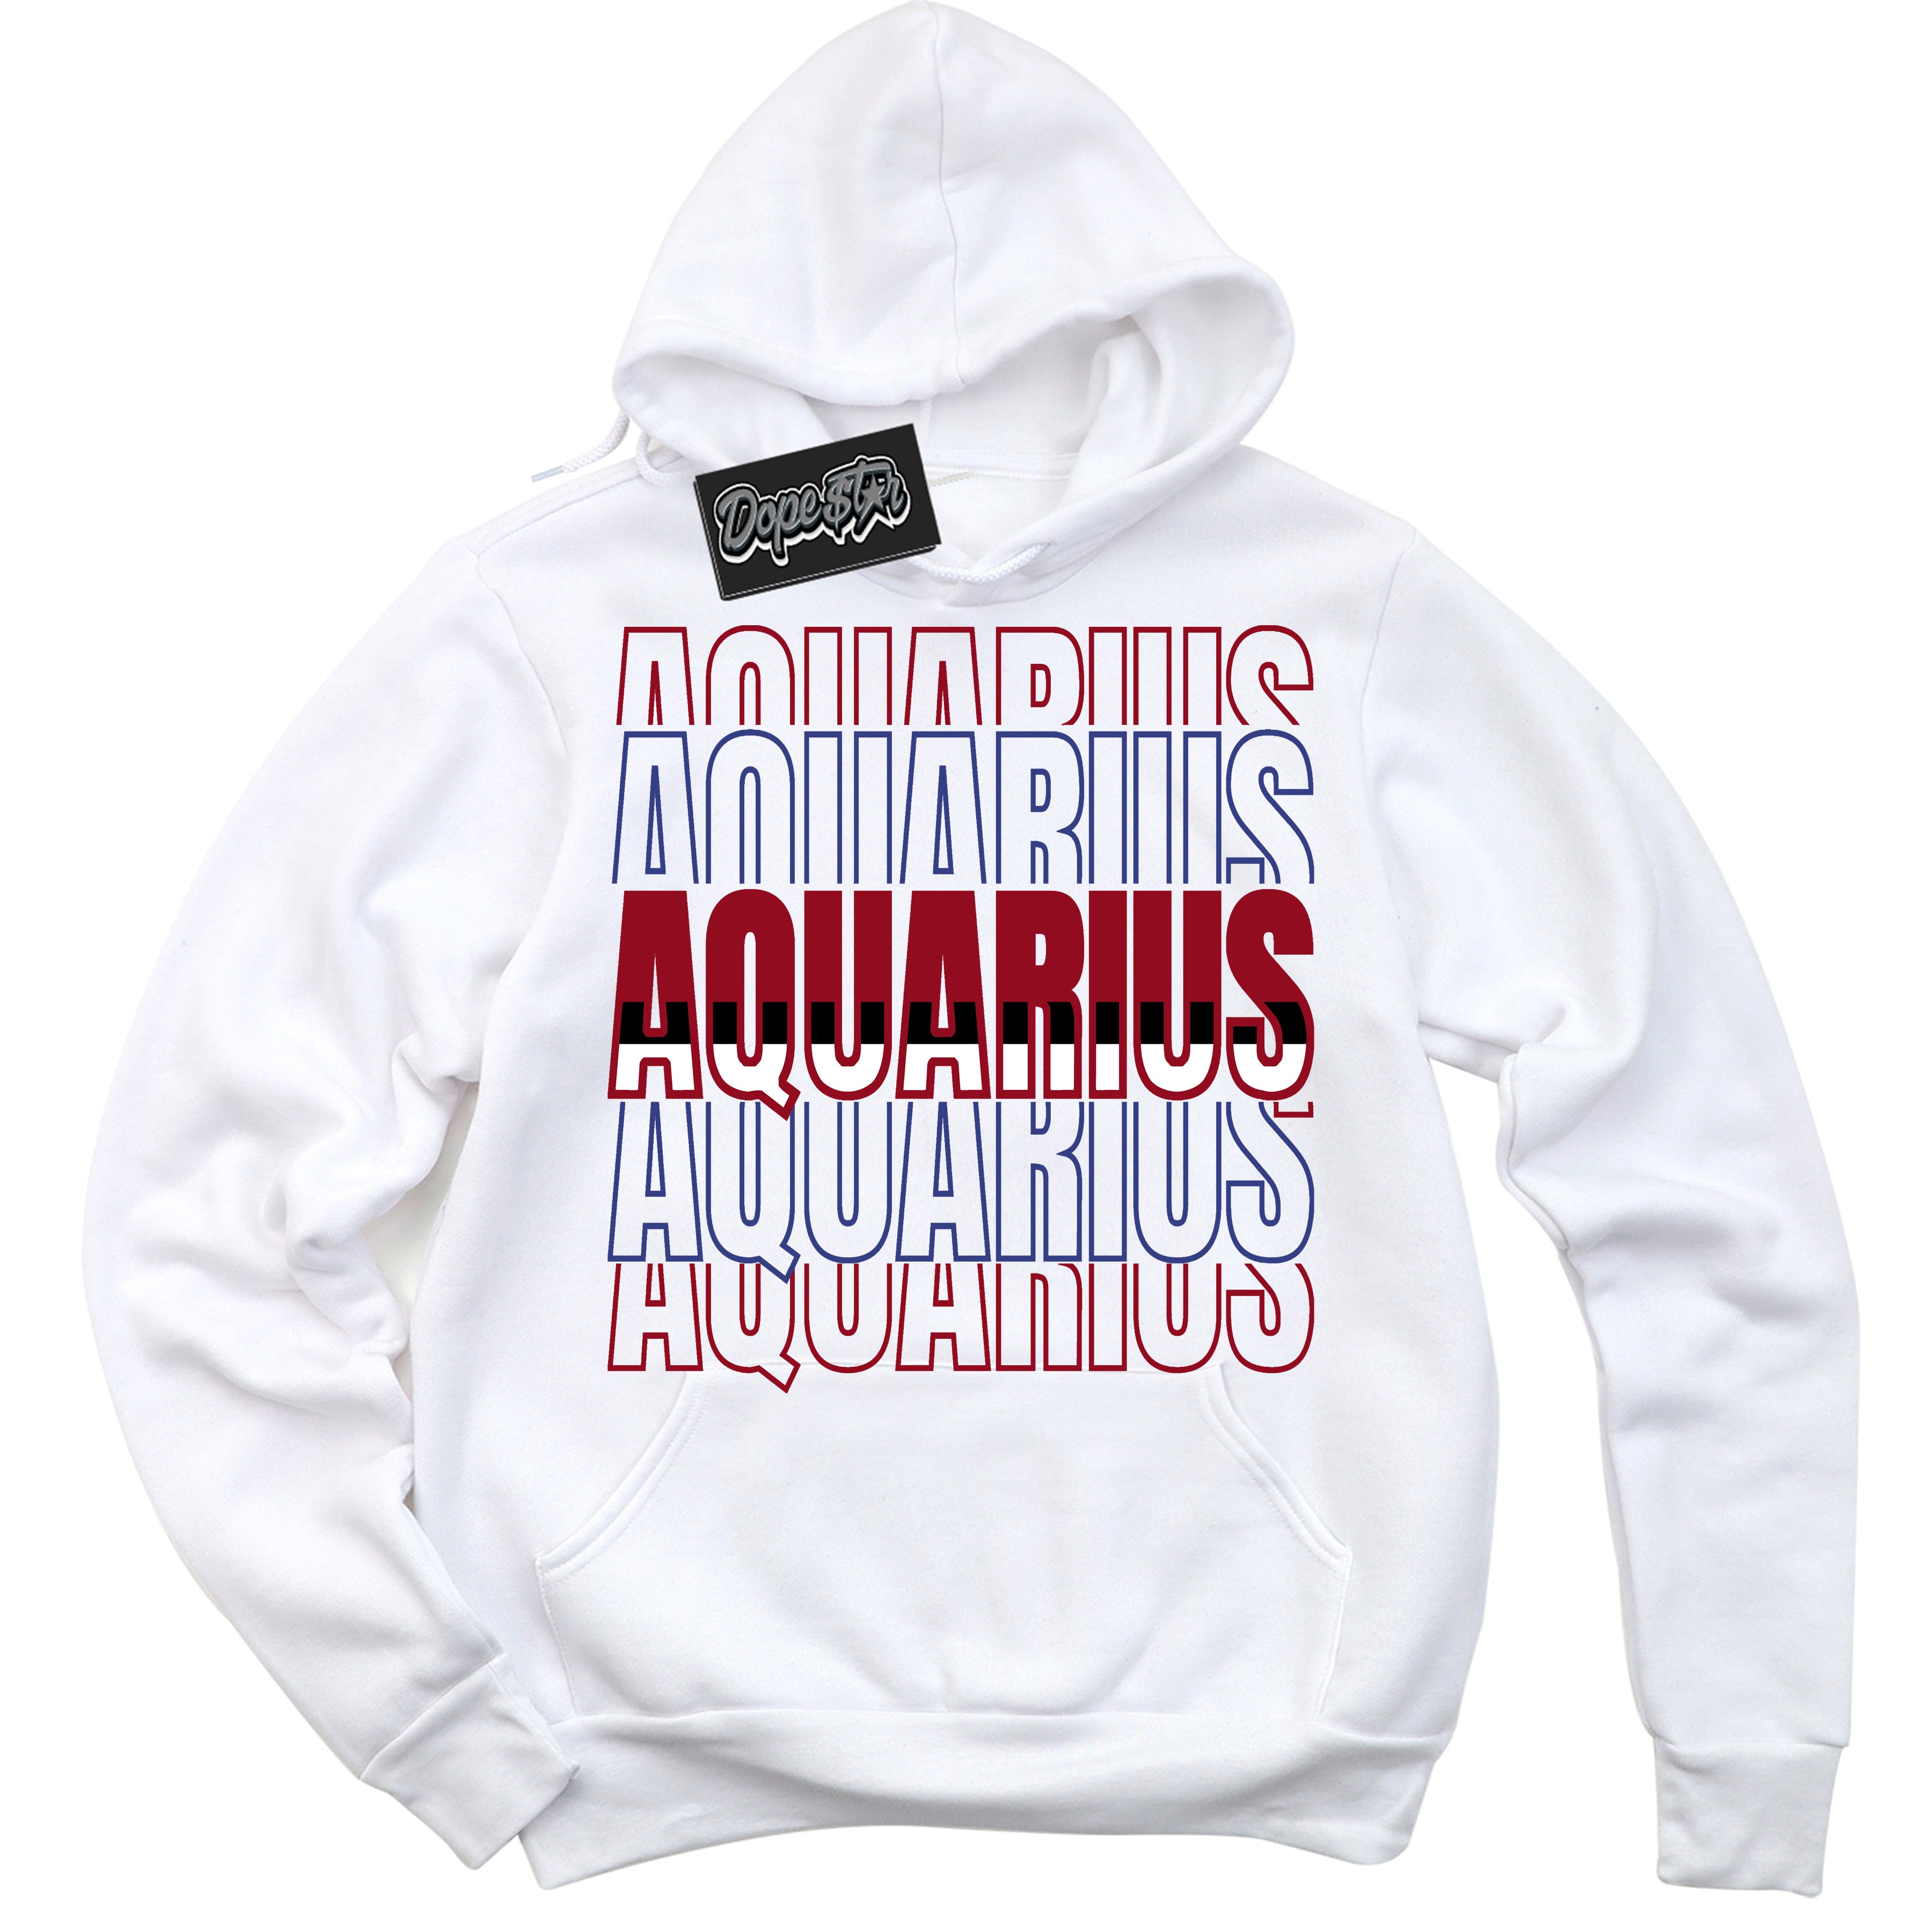 Cool White Hoodie with “ Aquarius ”  design that Perfectly Matches Playoffs 8s Sneakers.